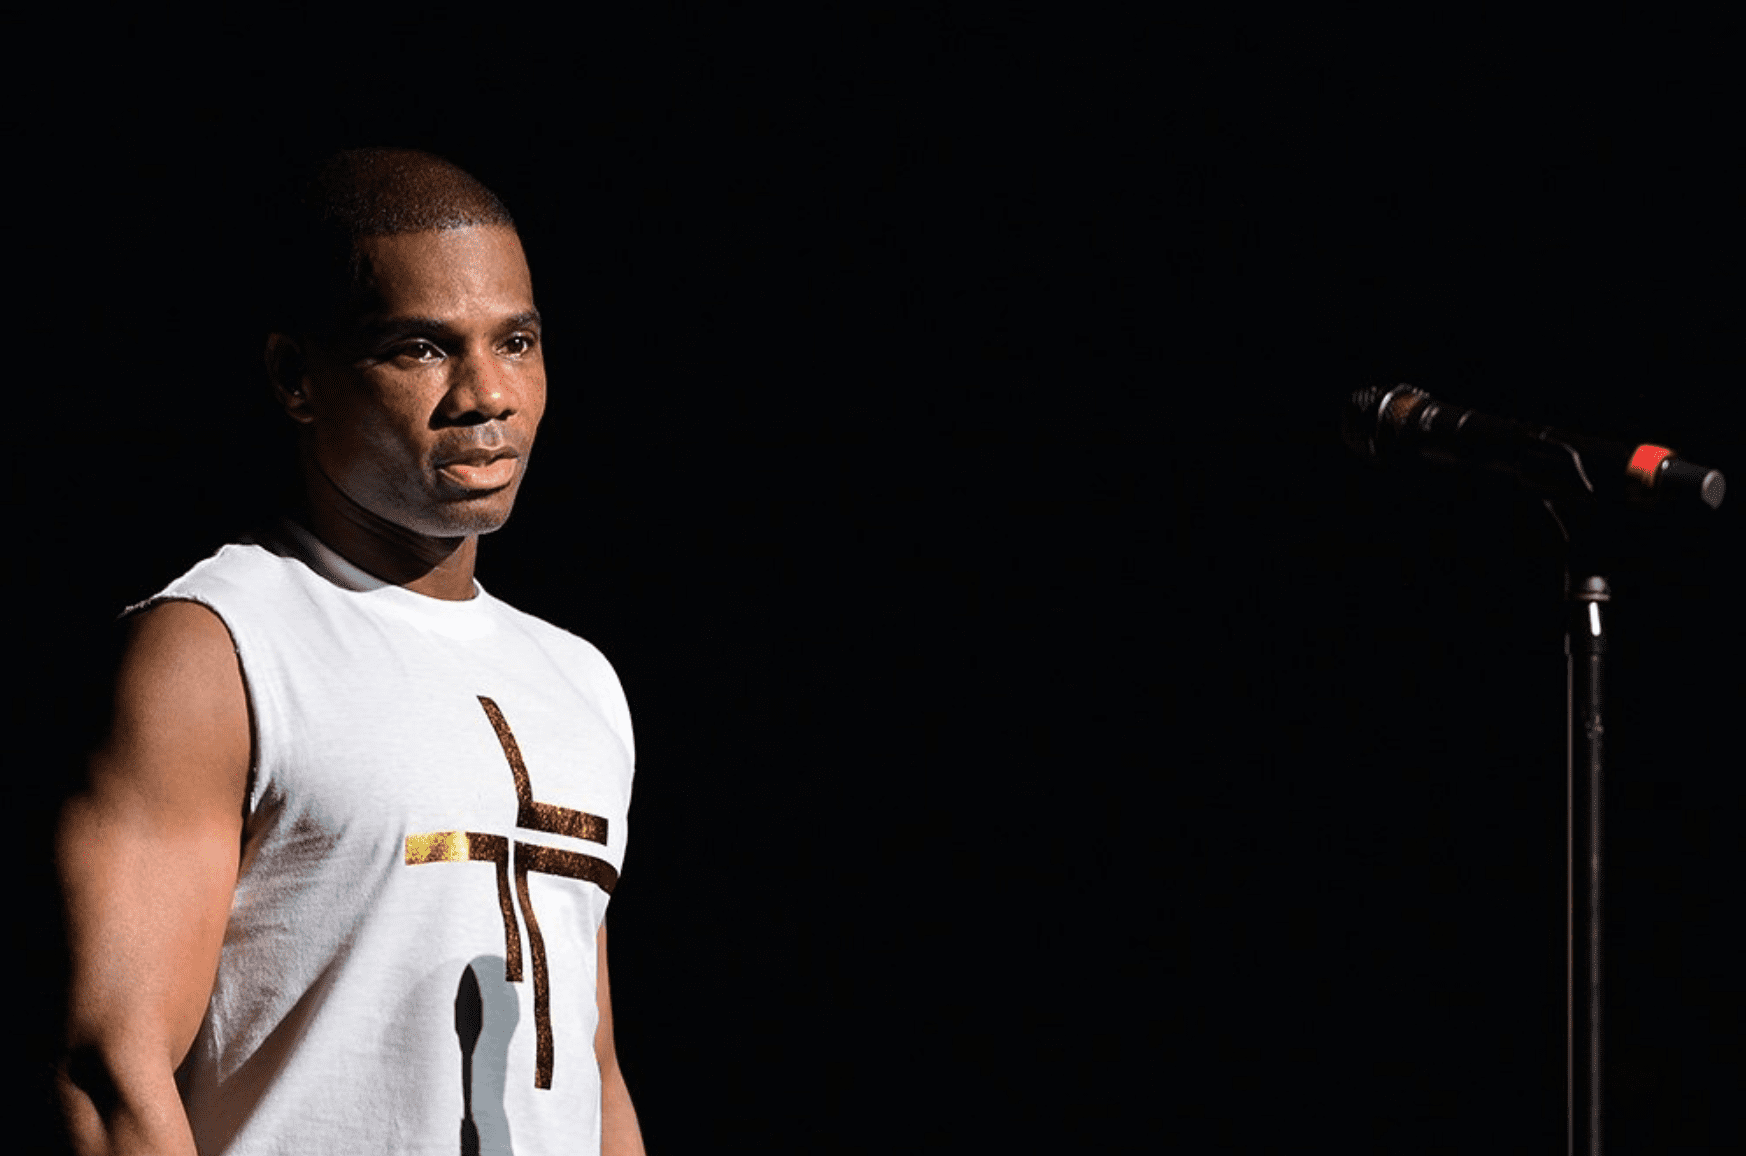 Kirk Franklin performs on stage at Au-Rene Theater in July 2019 in Miami, Florida. | Source: Getty Images